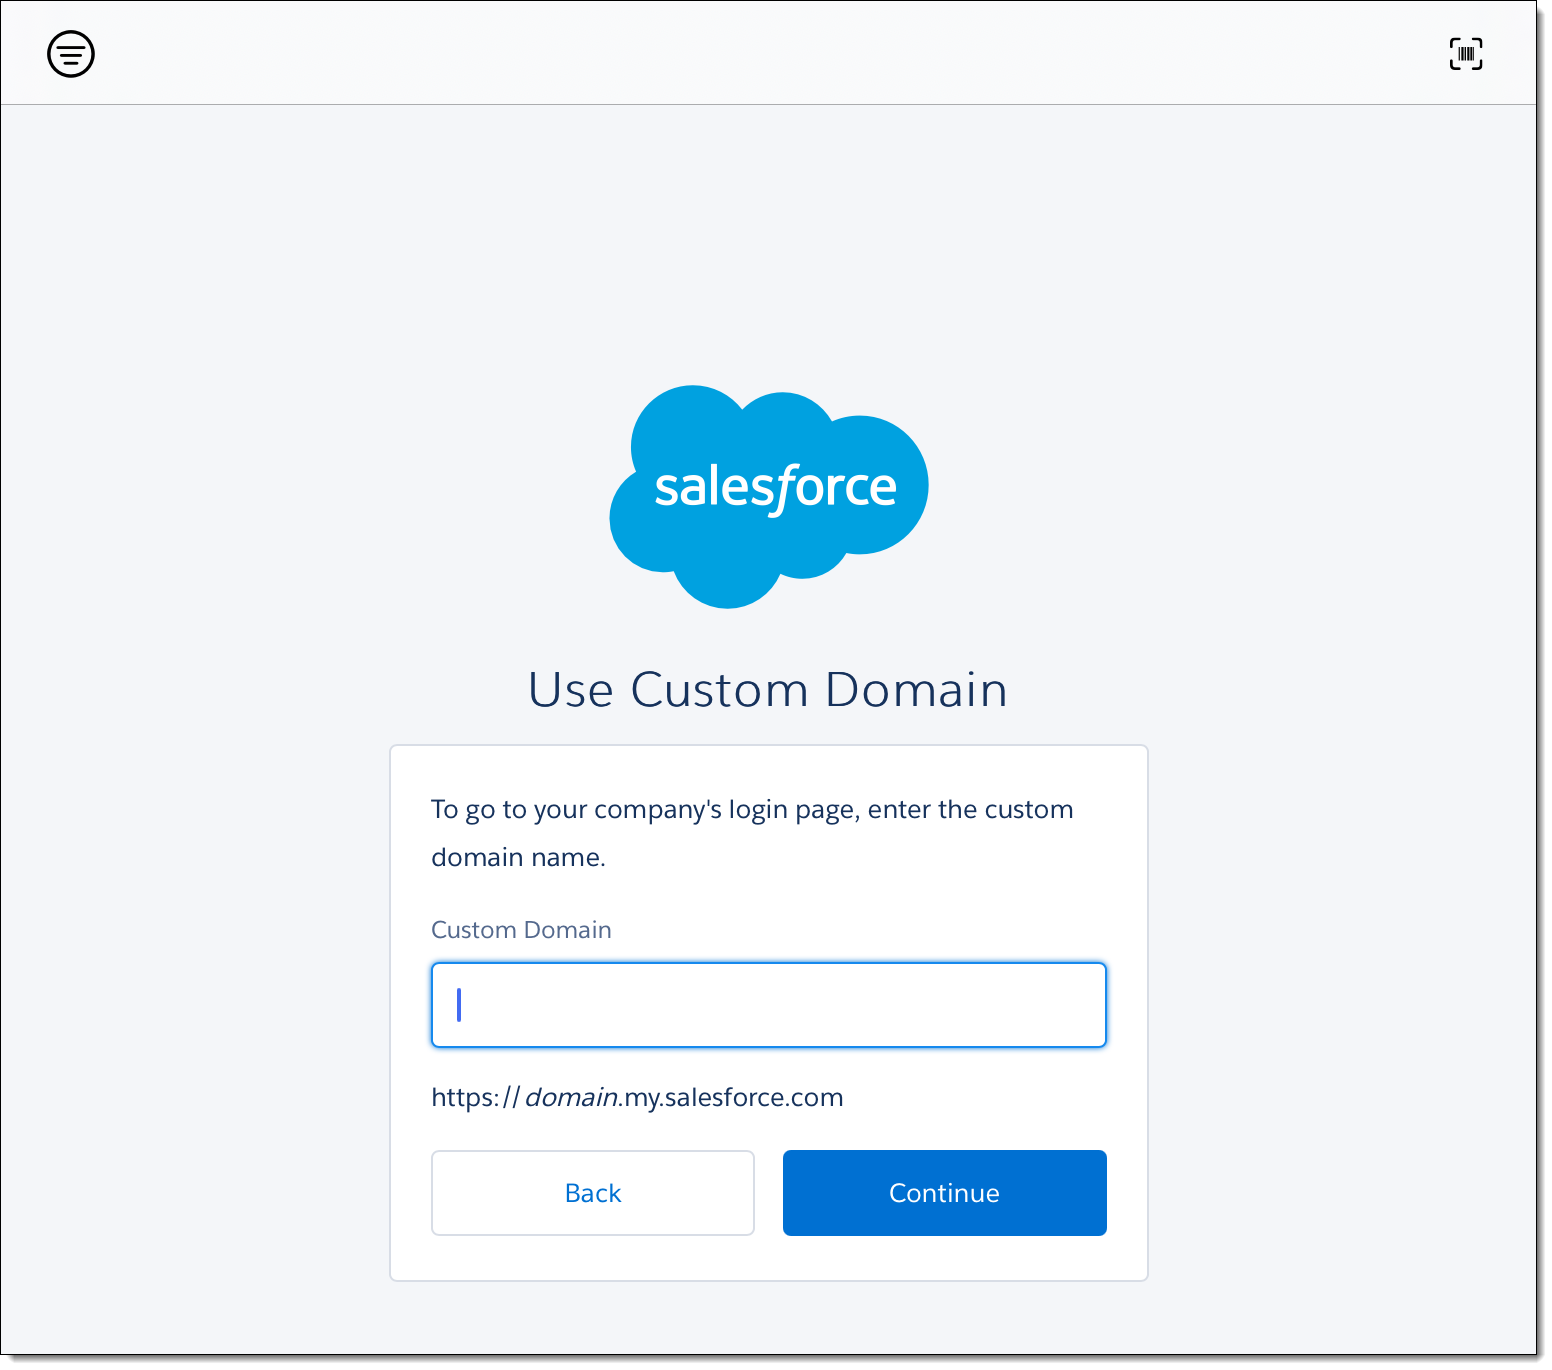 Example of a screen a user sees when adding a custom domain